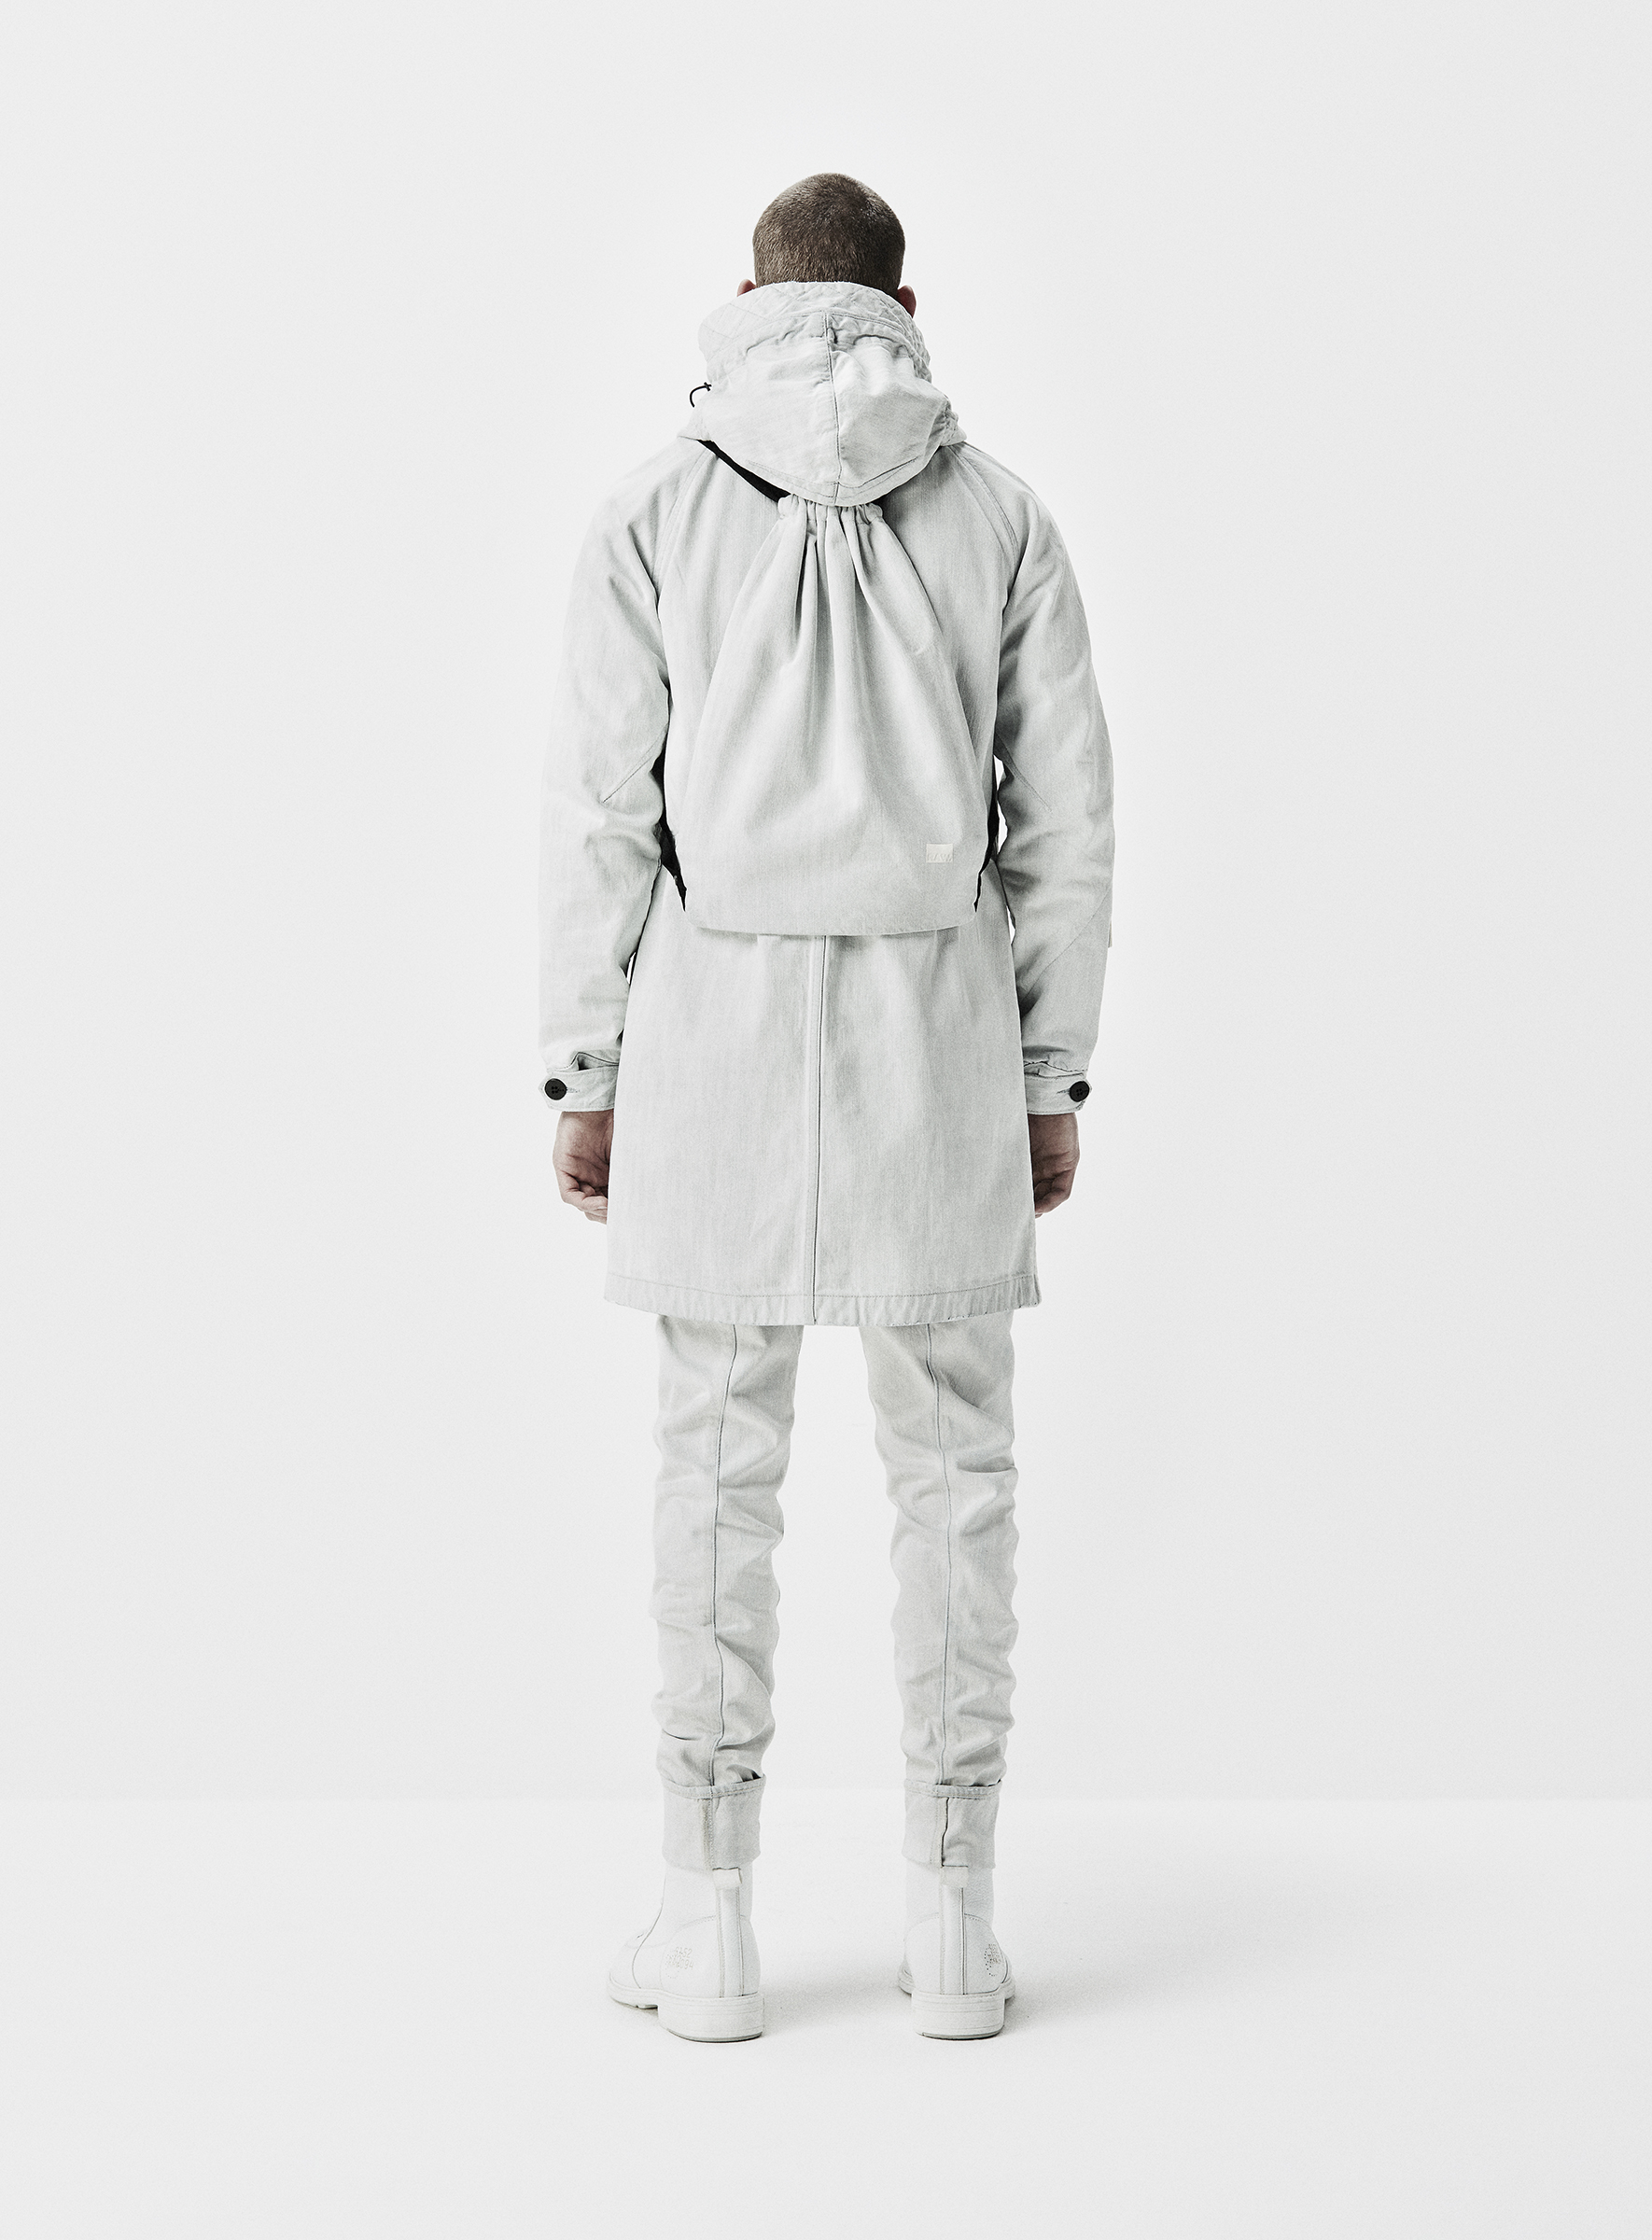 G Star Raw Research 7